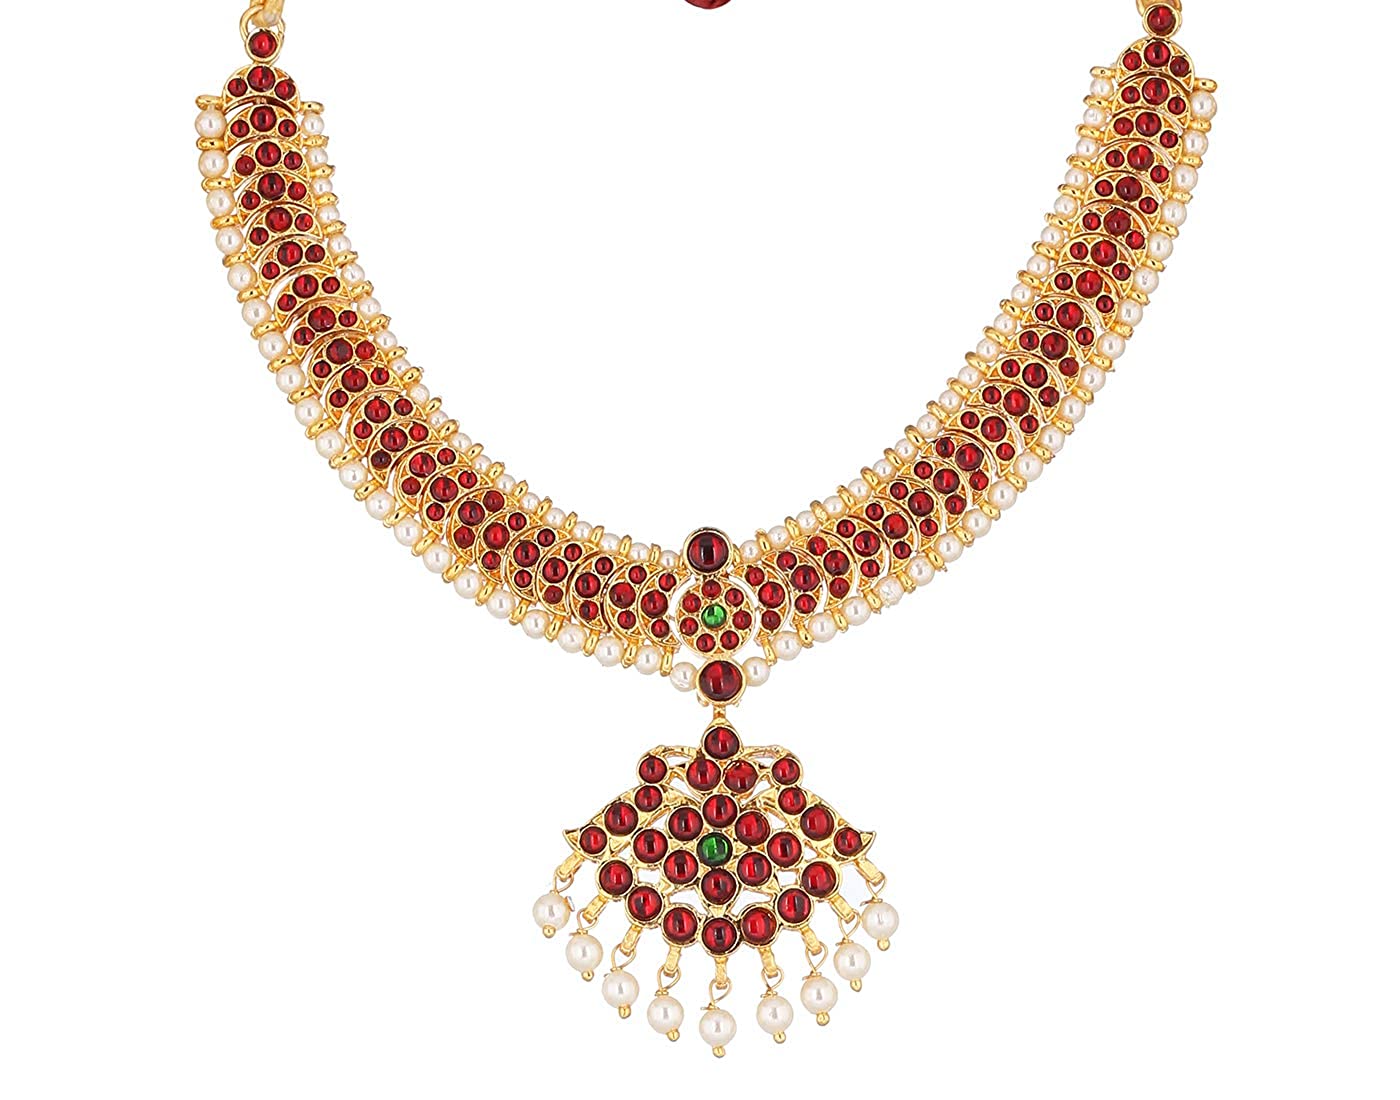 Goldencollections Bharatanatyam Jewellery Necklace with Pearls